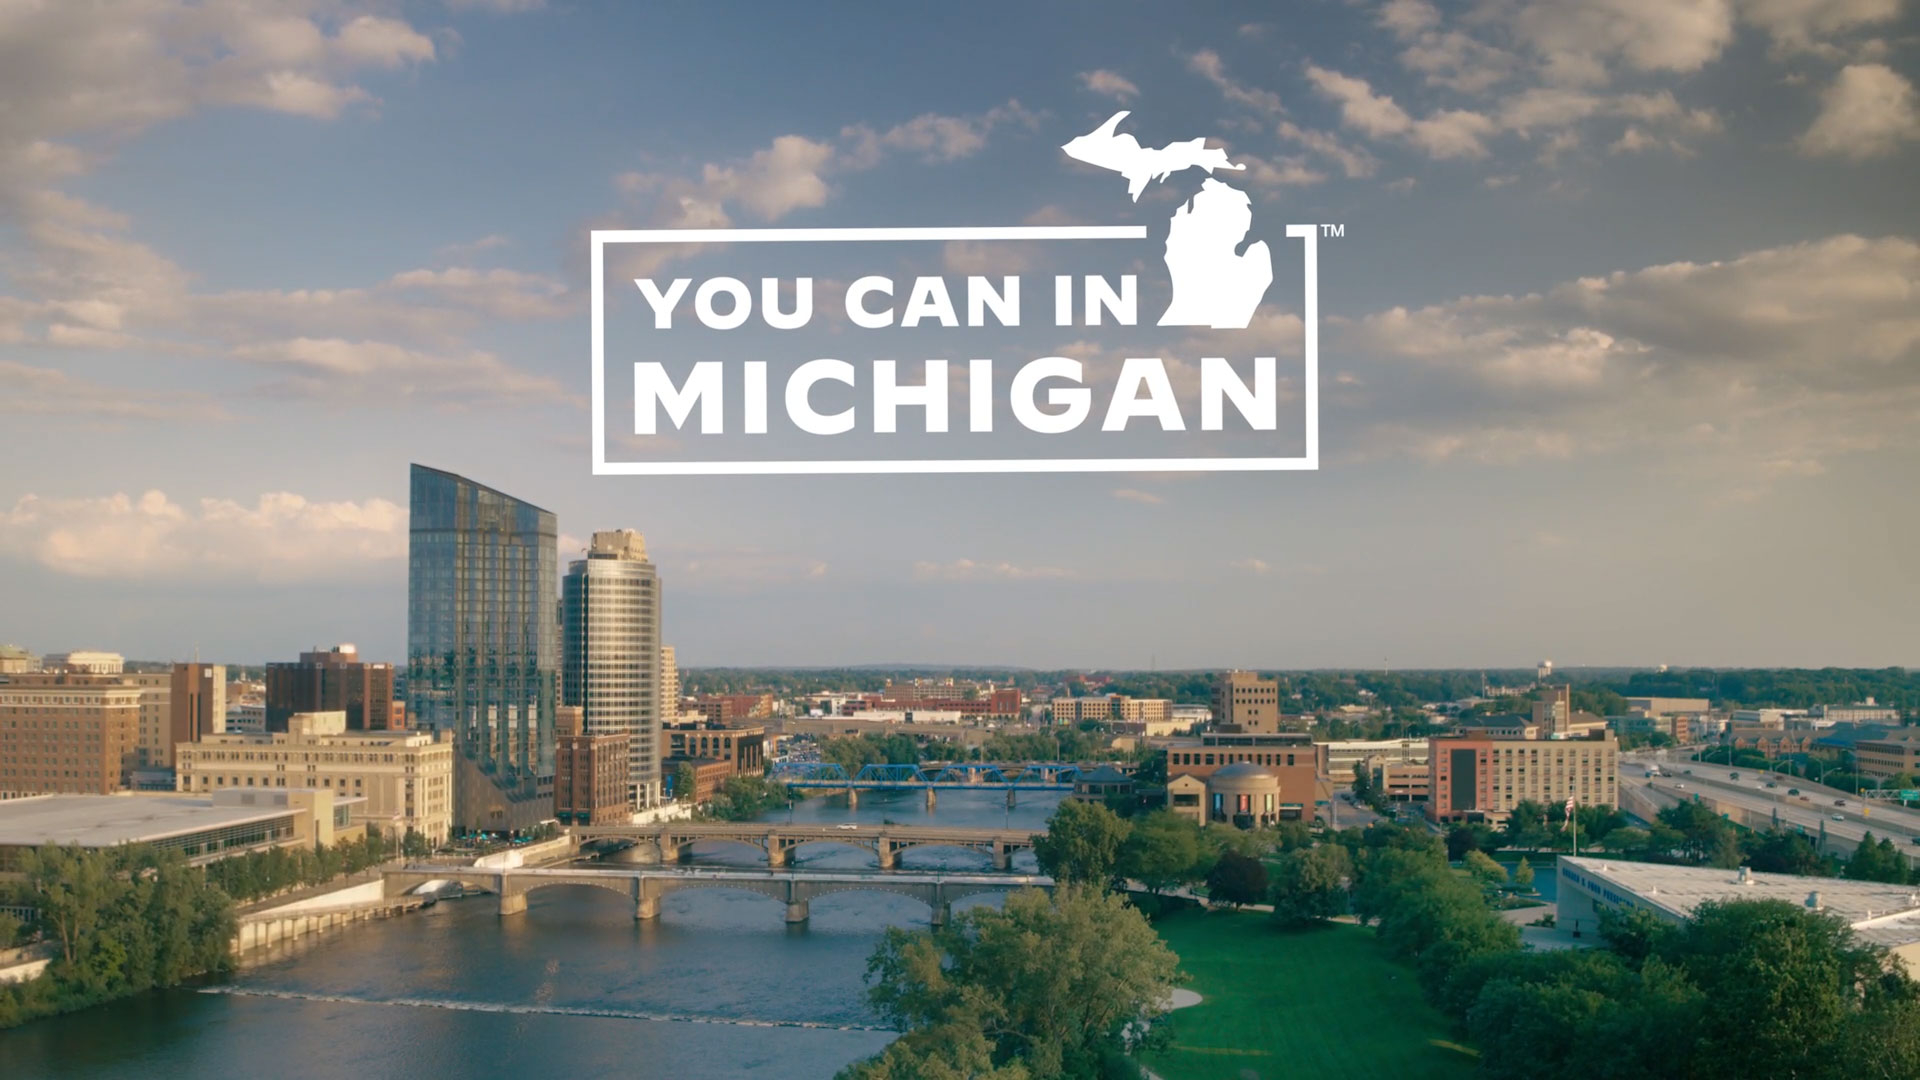 The “You Can in Michigan” campaign brings to life the enviable cost of living, welcoming communities and outdoor recreation available in Michigan for all kinds of workers, from techies on the coasts and city dwellers seeking affordability to young adults in rural communities with big dreams to impact the future.